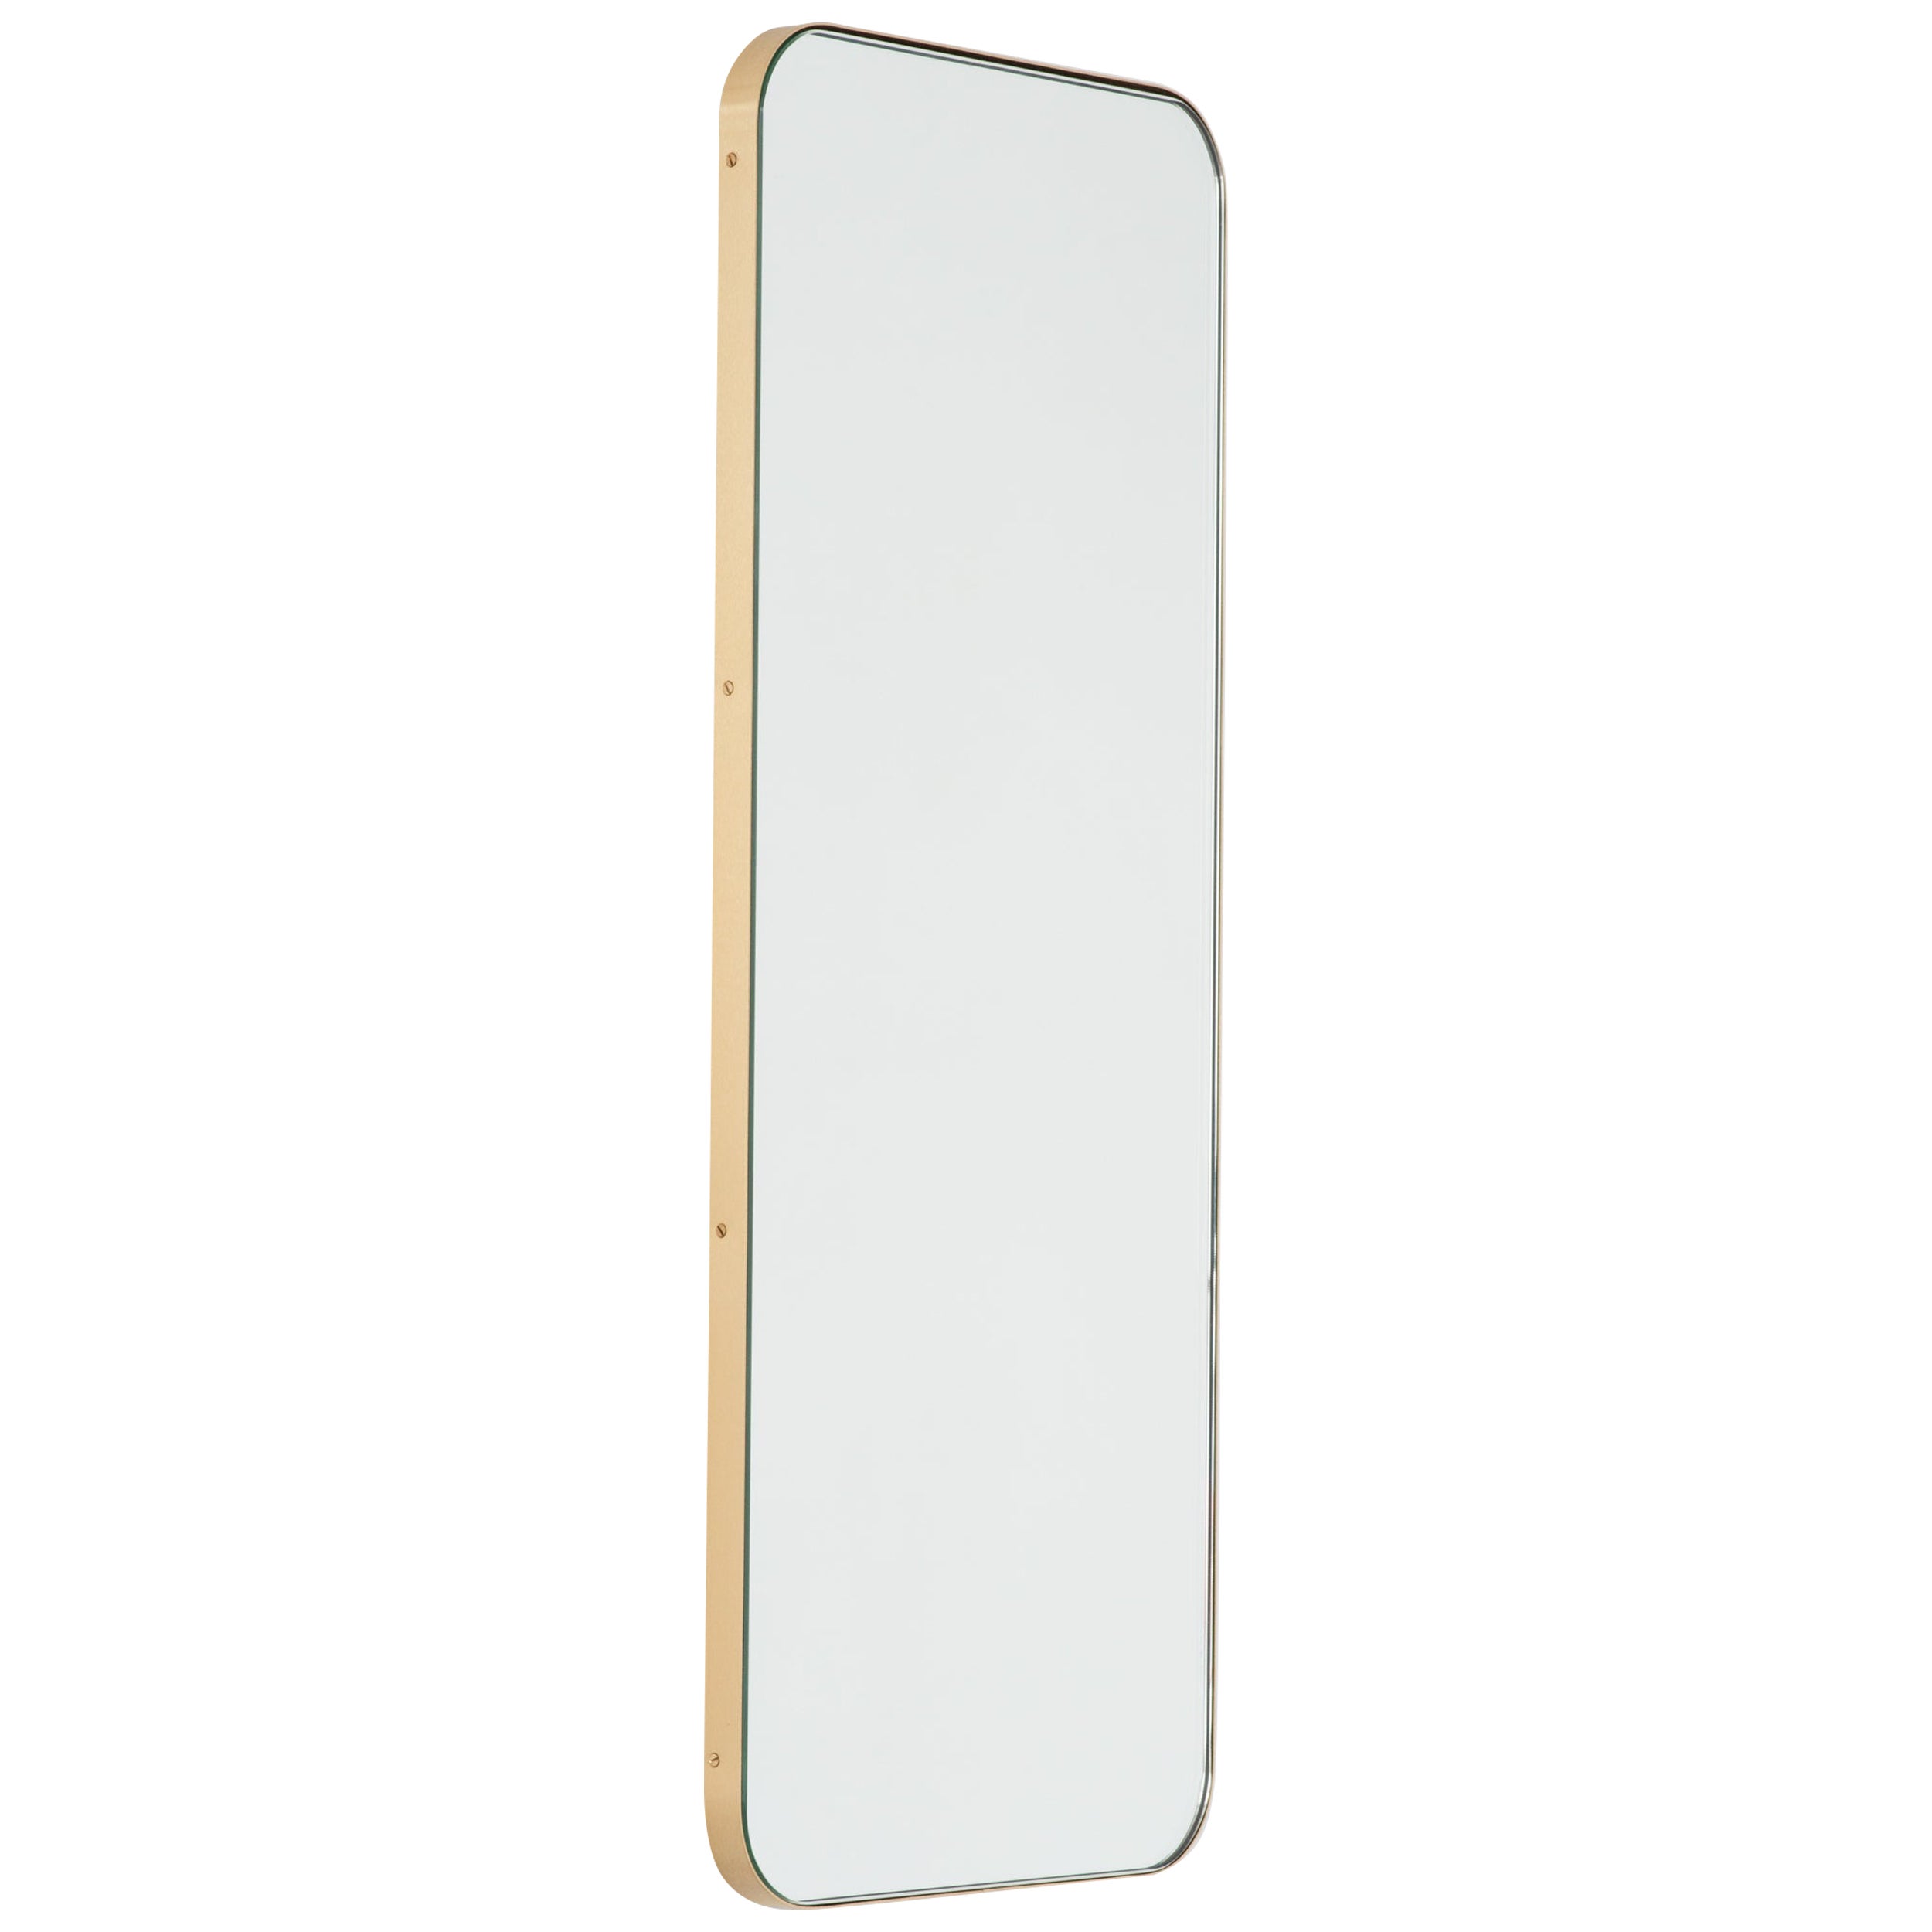 Quadris Rectangular Modern Mirror with a Brass Frame, Large For Sale